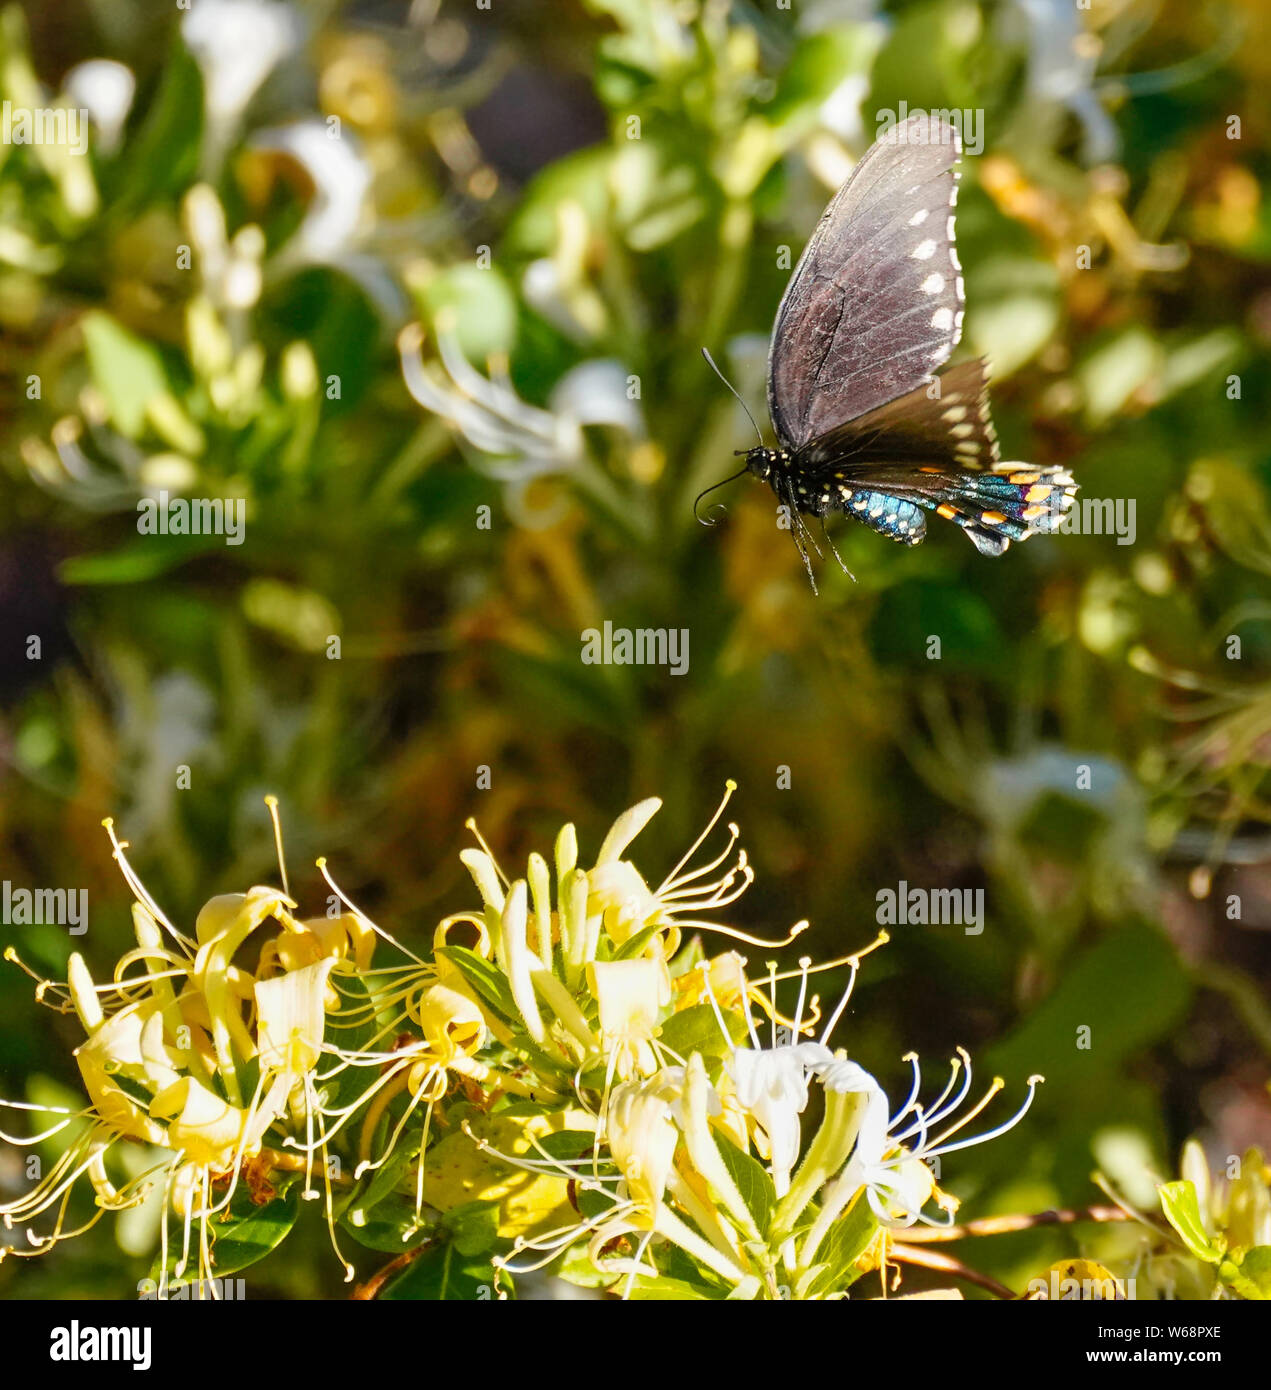 Pipe Vine Swallowtail Butterfly in Flight Among the Honeysuckle Flowers. Stock Photo